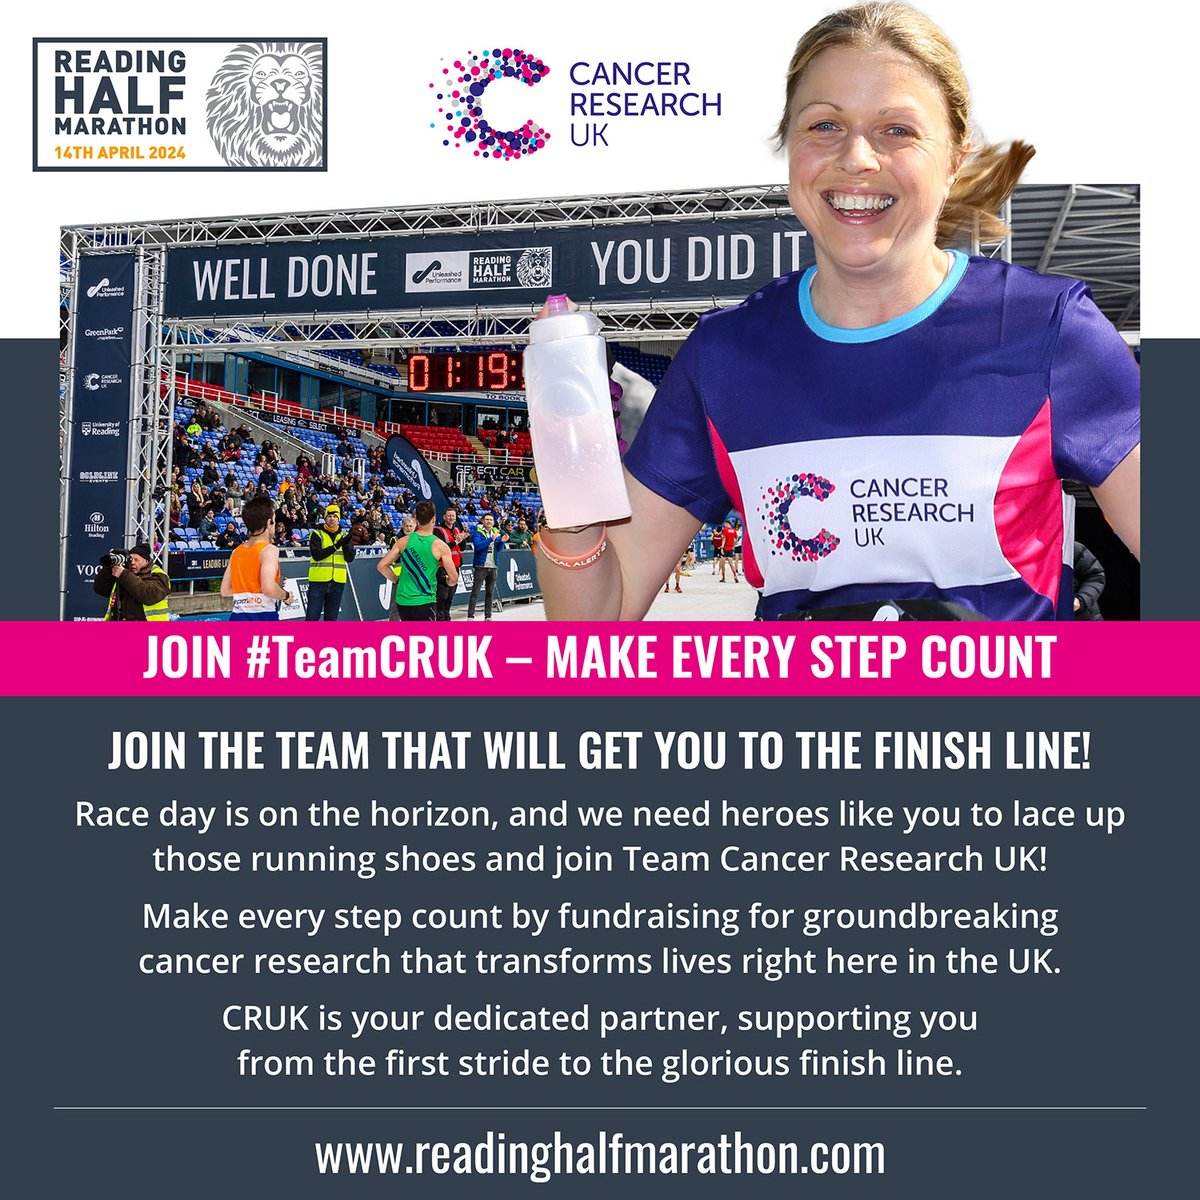 Join them, cheer them or support them. Cancer Research UK runners will be all through the field at the Reading Half Marathon. Jin the team to see you to the finish line.